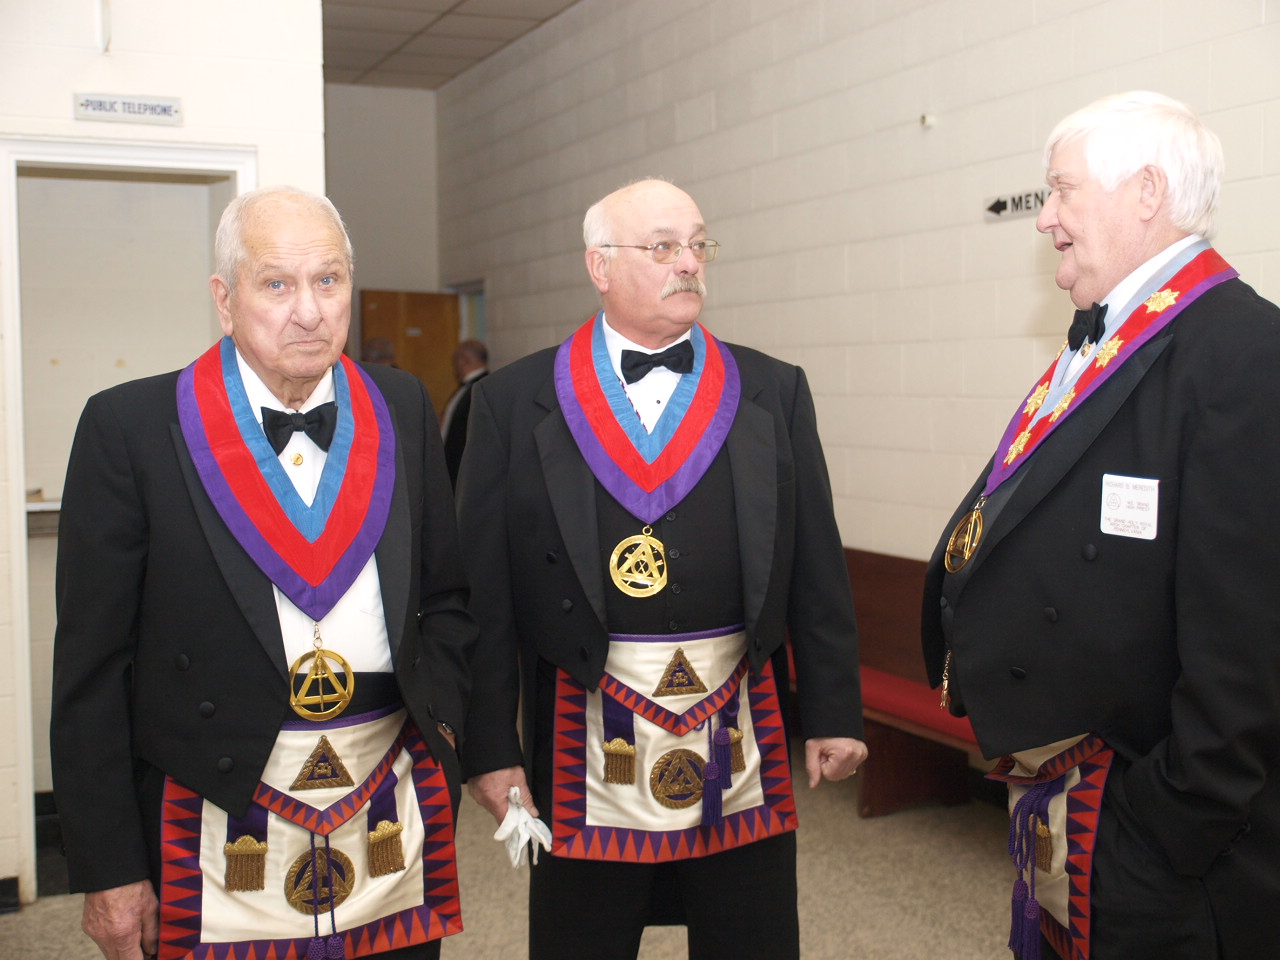 three men standing and wearing their uniforms with ties